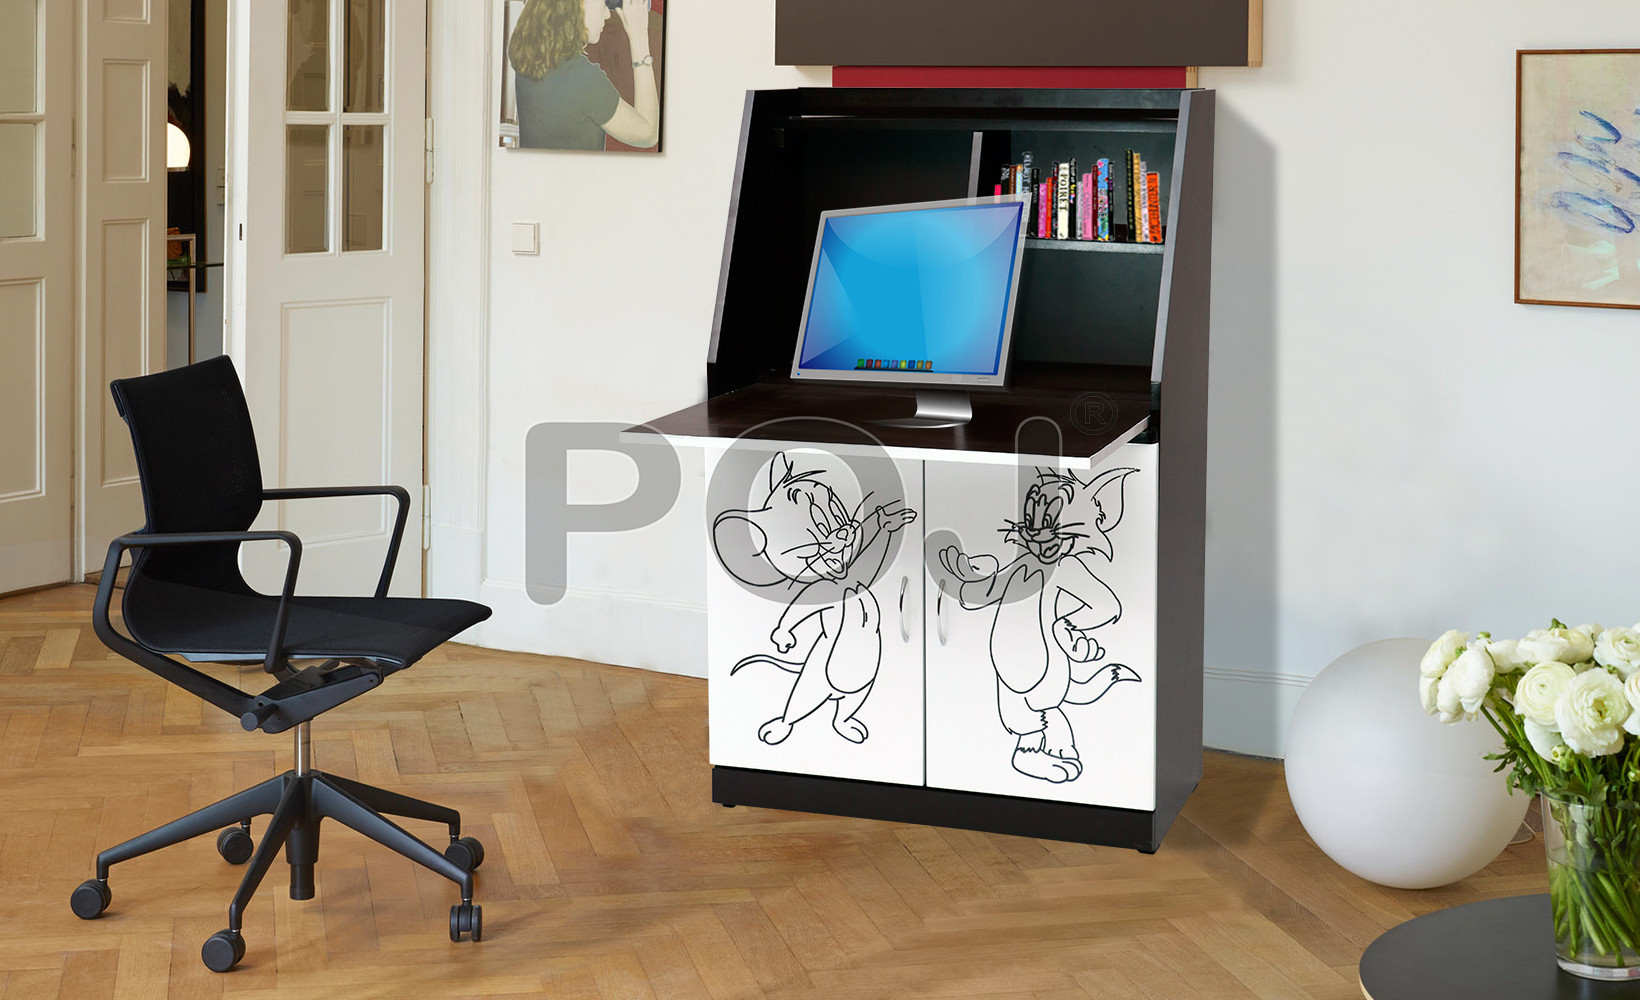 Children's Study Table for TOM & JERRY with Cartoon Printed Hardwood  Painted Finish from Study Partner